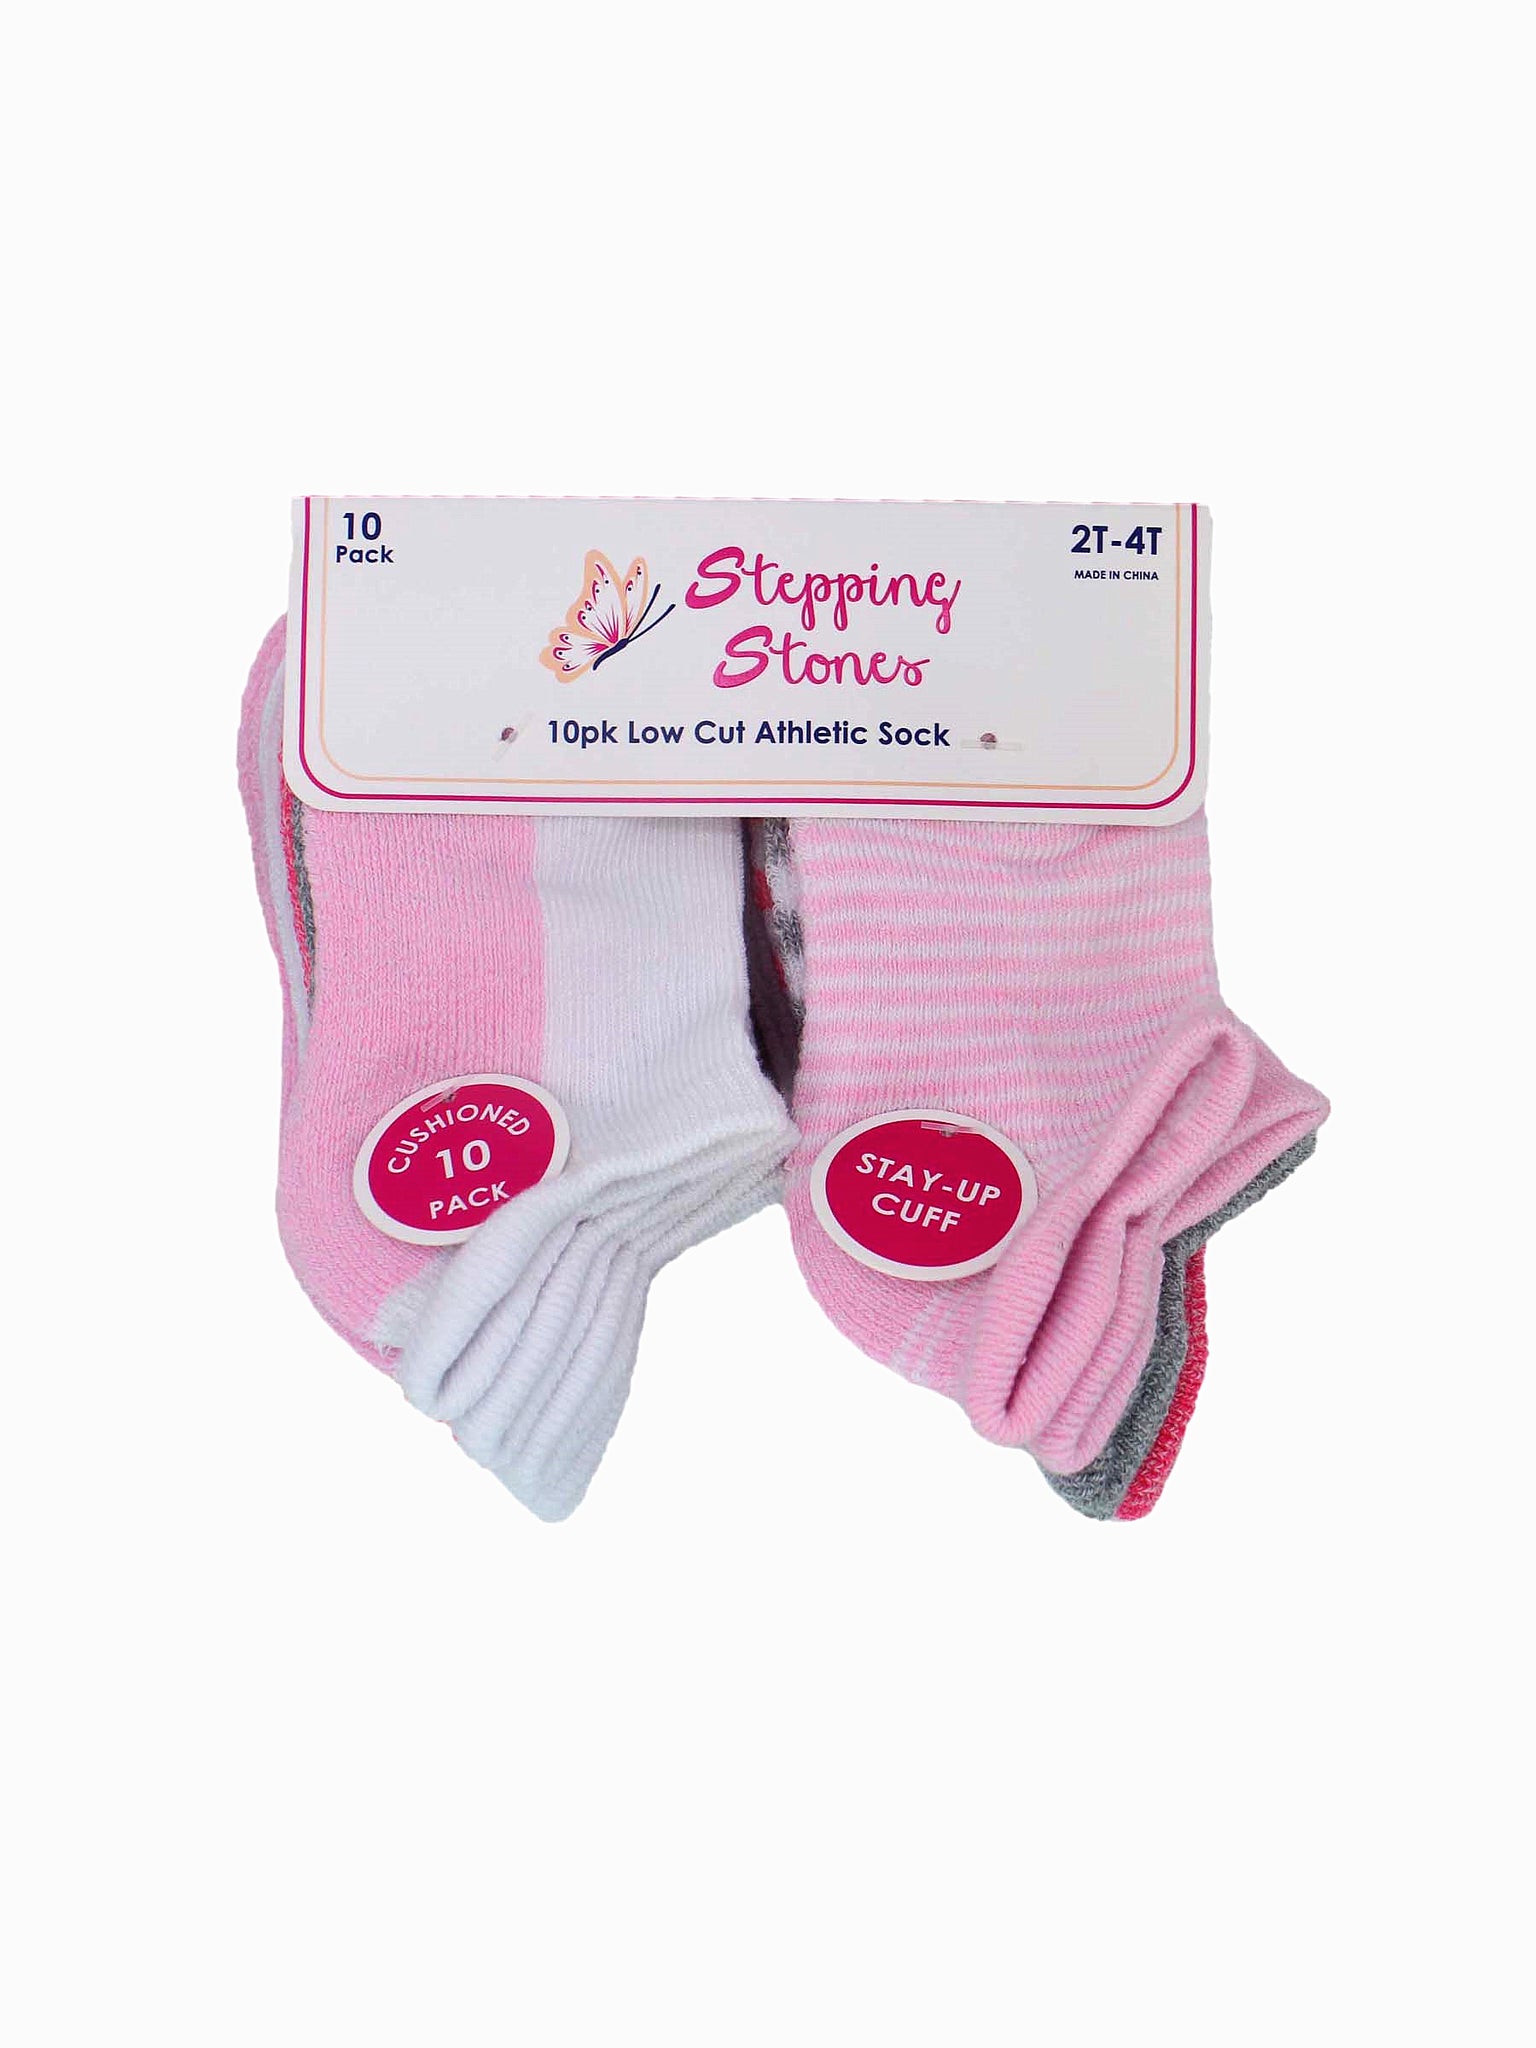 Stepping Stones Toddler 10 Pack Athletic Socks- Colorblock